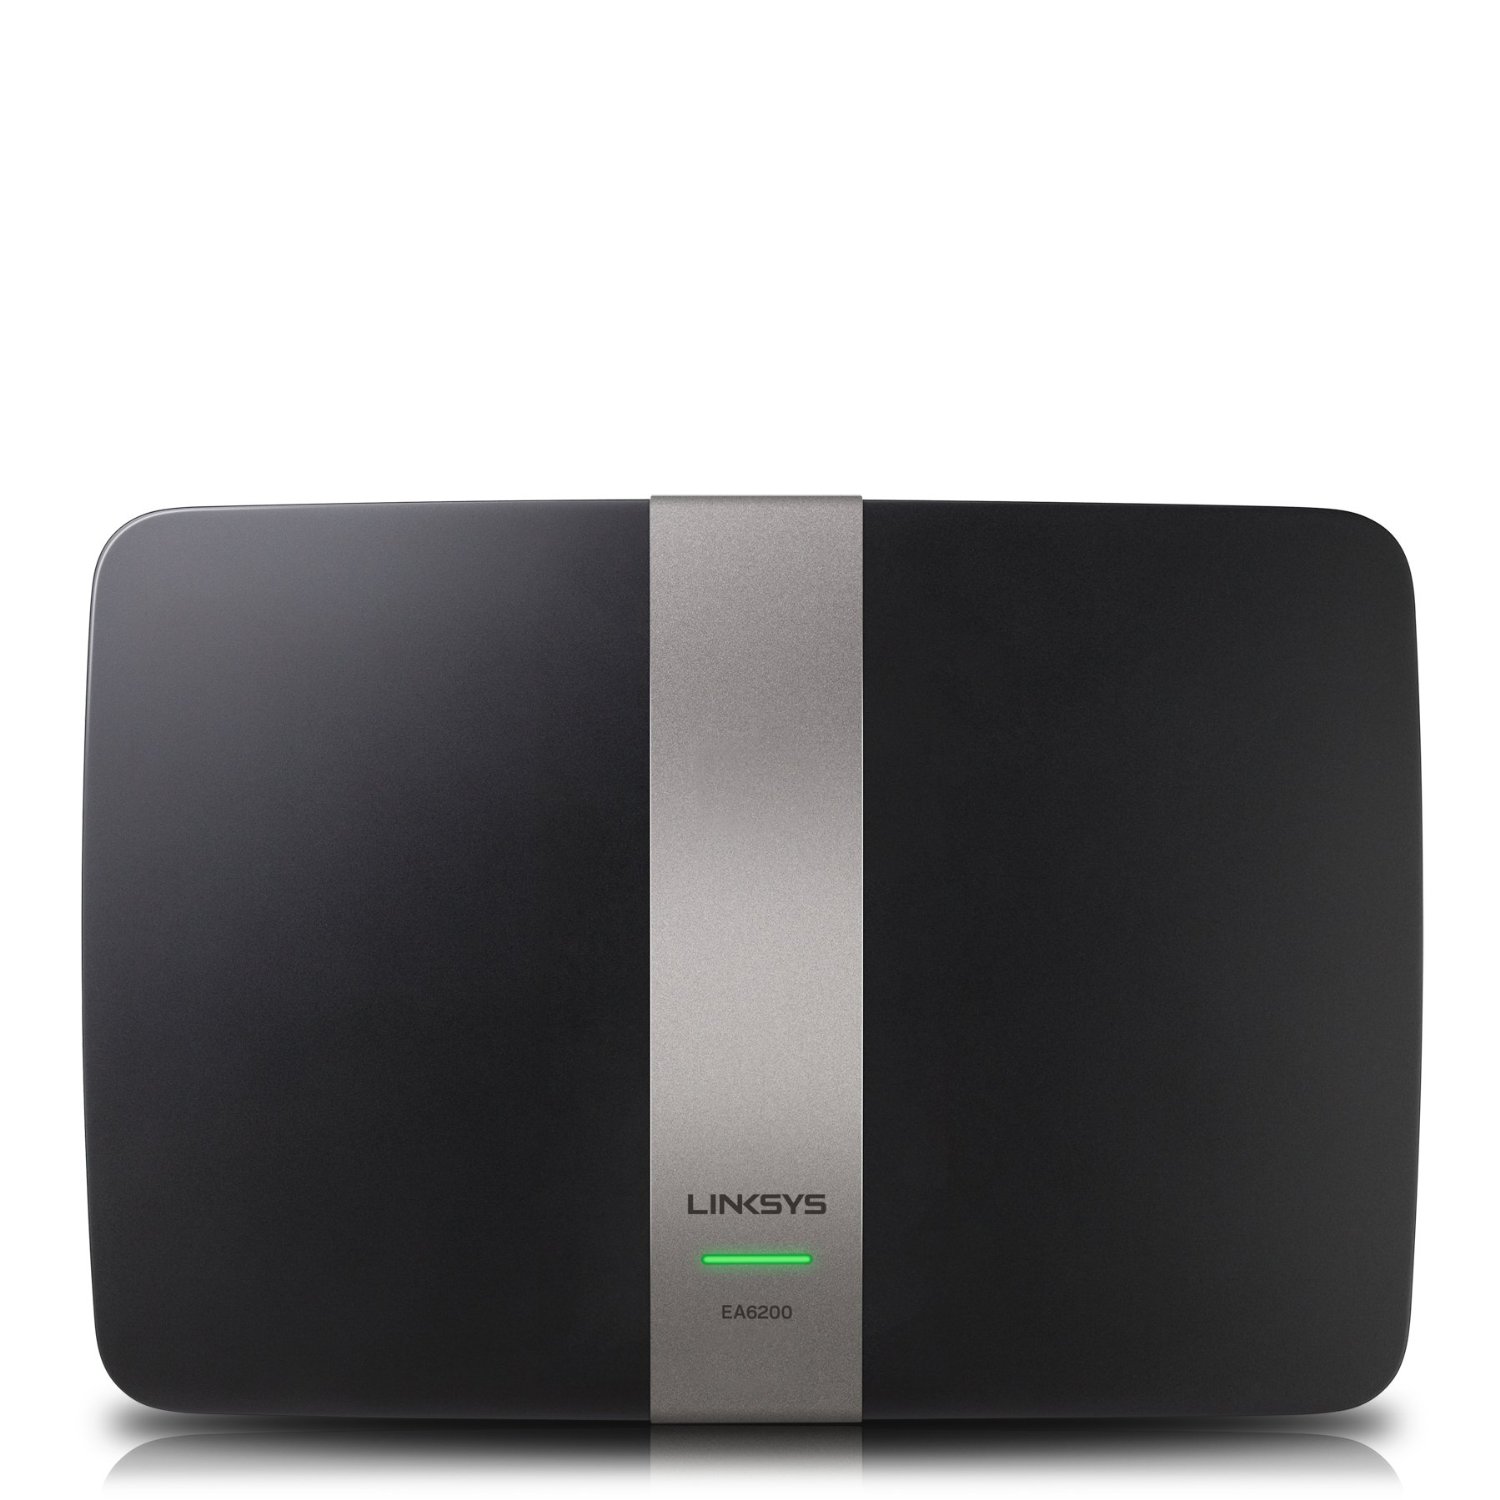 Linksys router download software